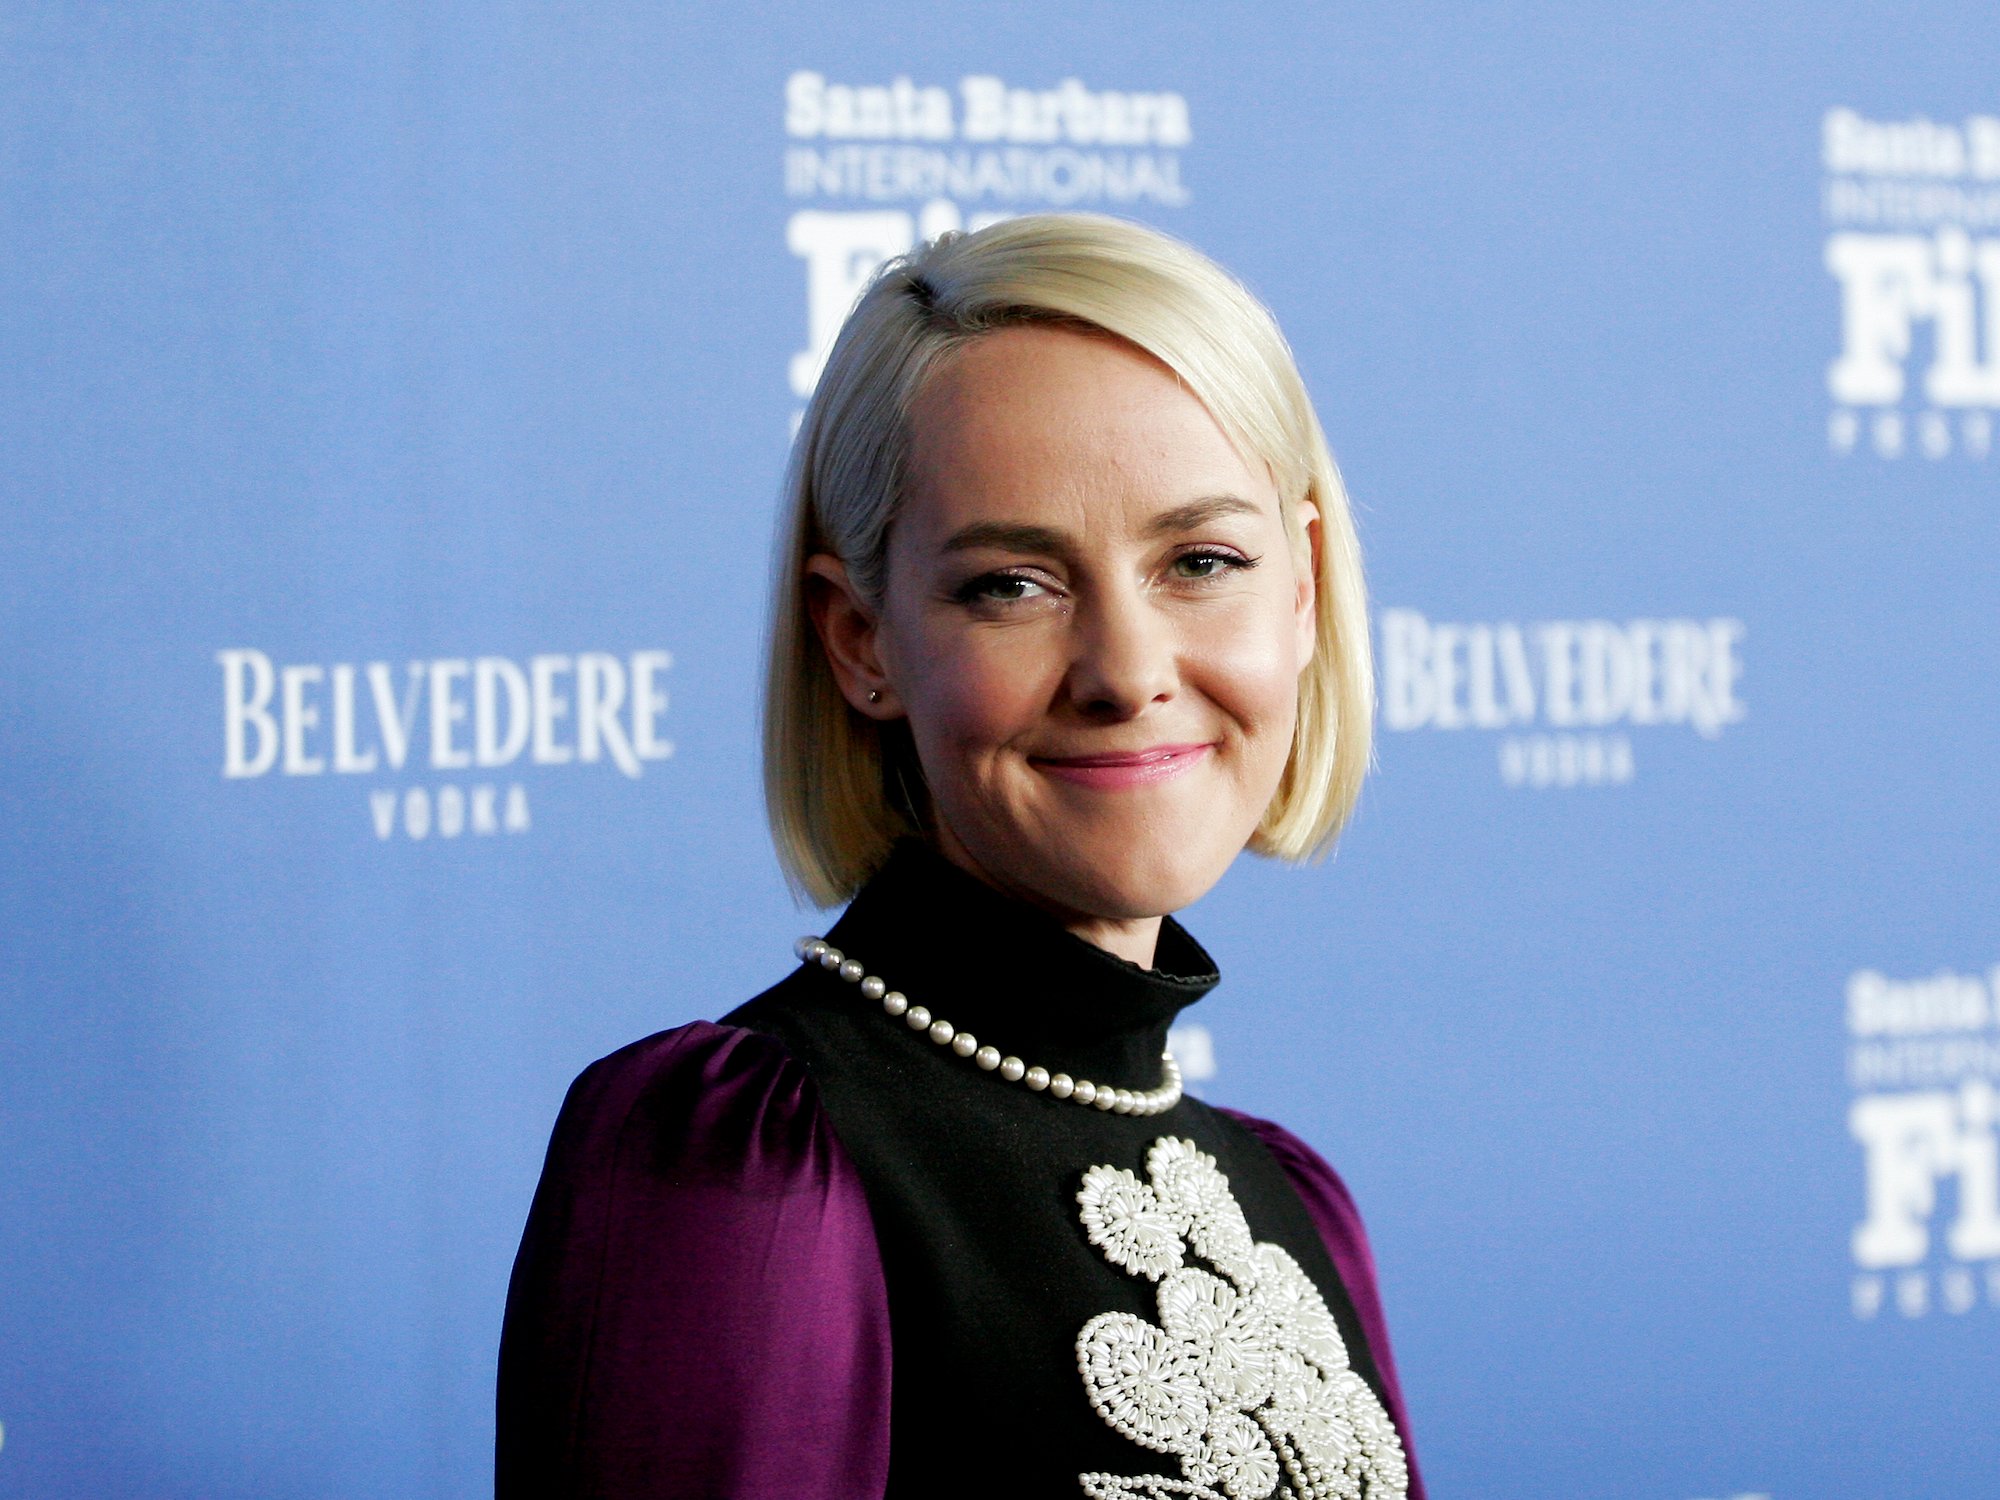 The Parent Trap Jena Malone Turned Down The Roles Of Annie And Hallie